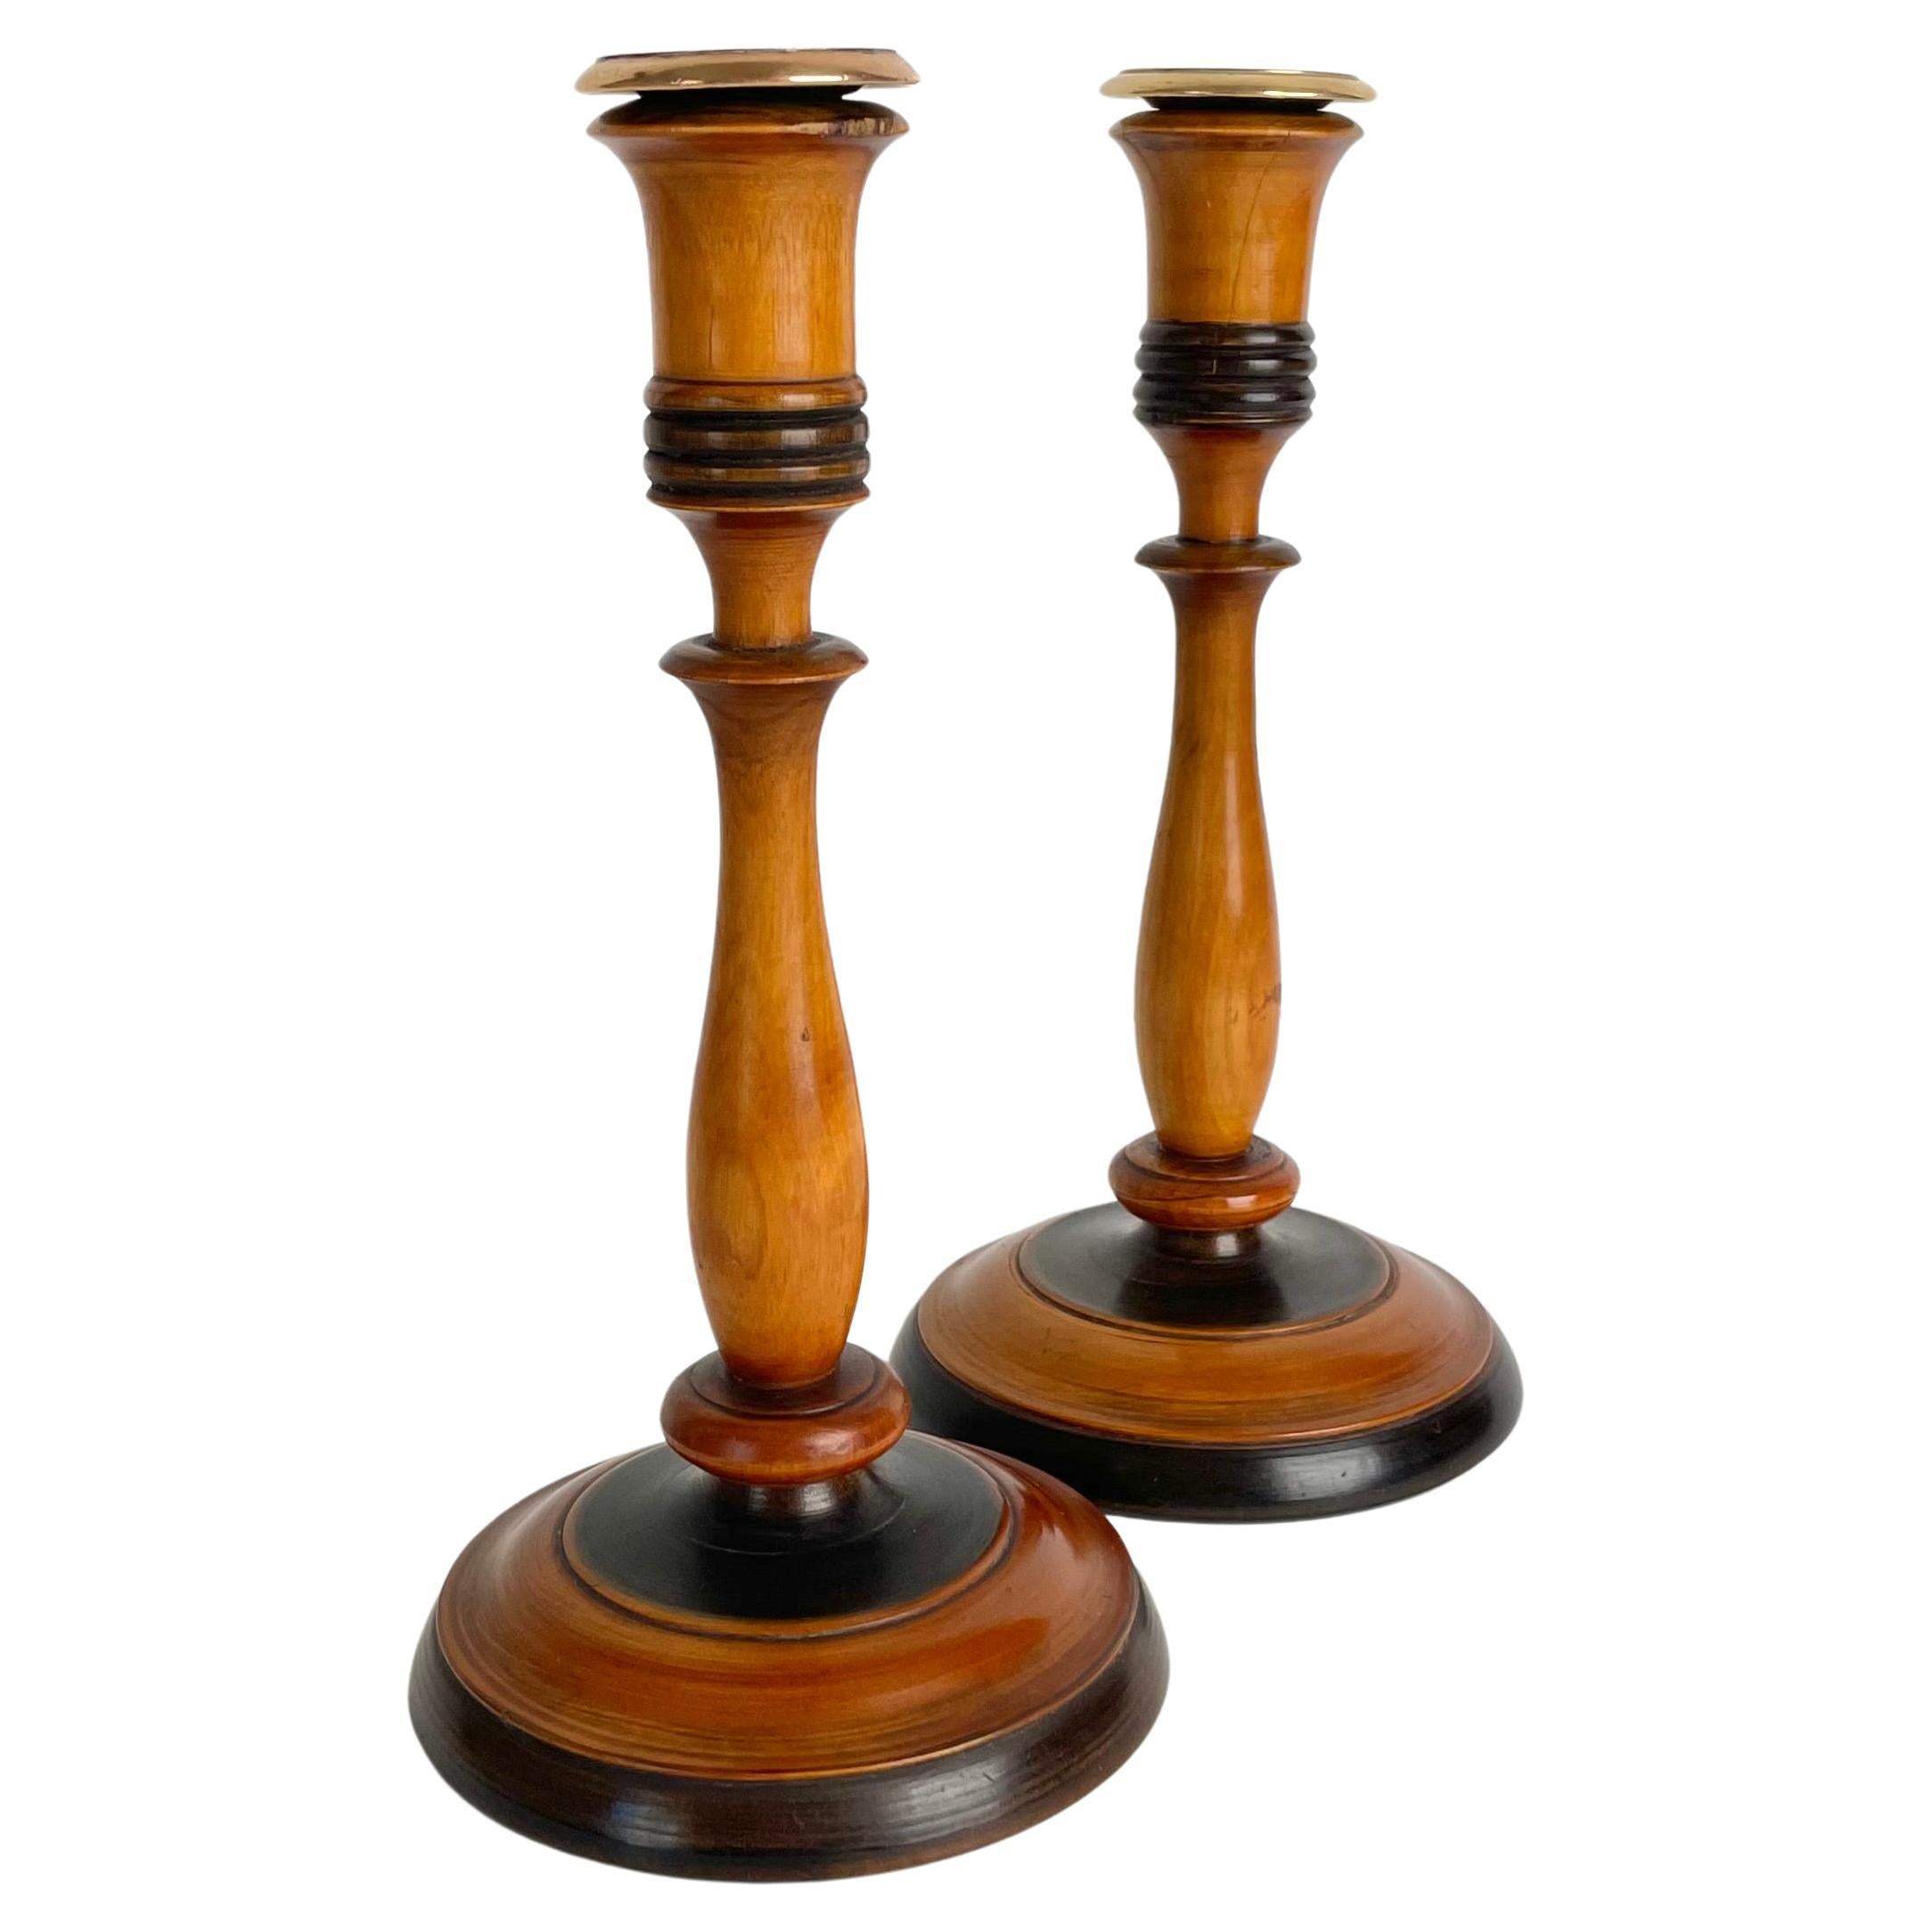 Pair of Birch Candlesticks in Swedish Karl-Johan from the 1820s-1830s For Sale